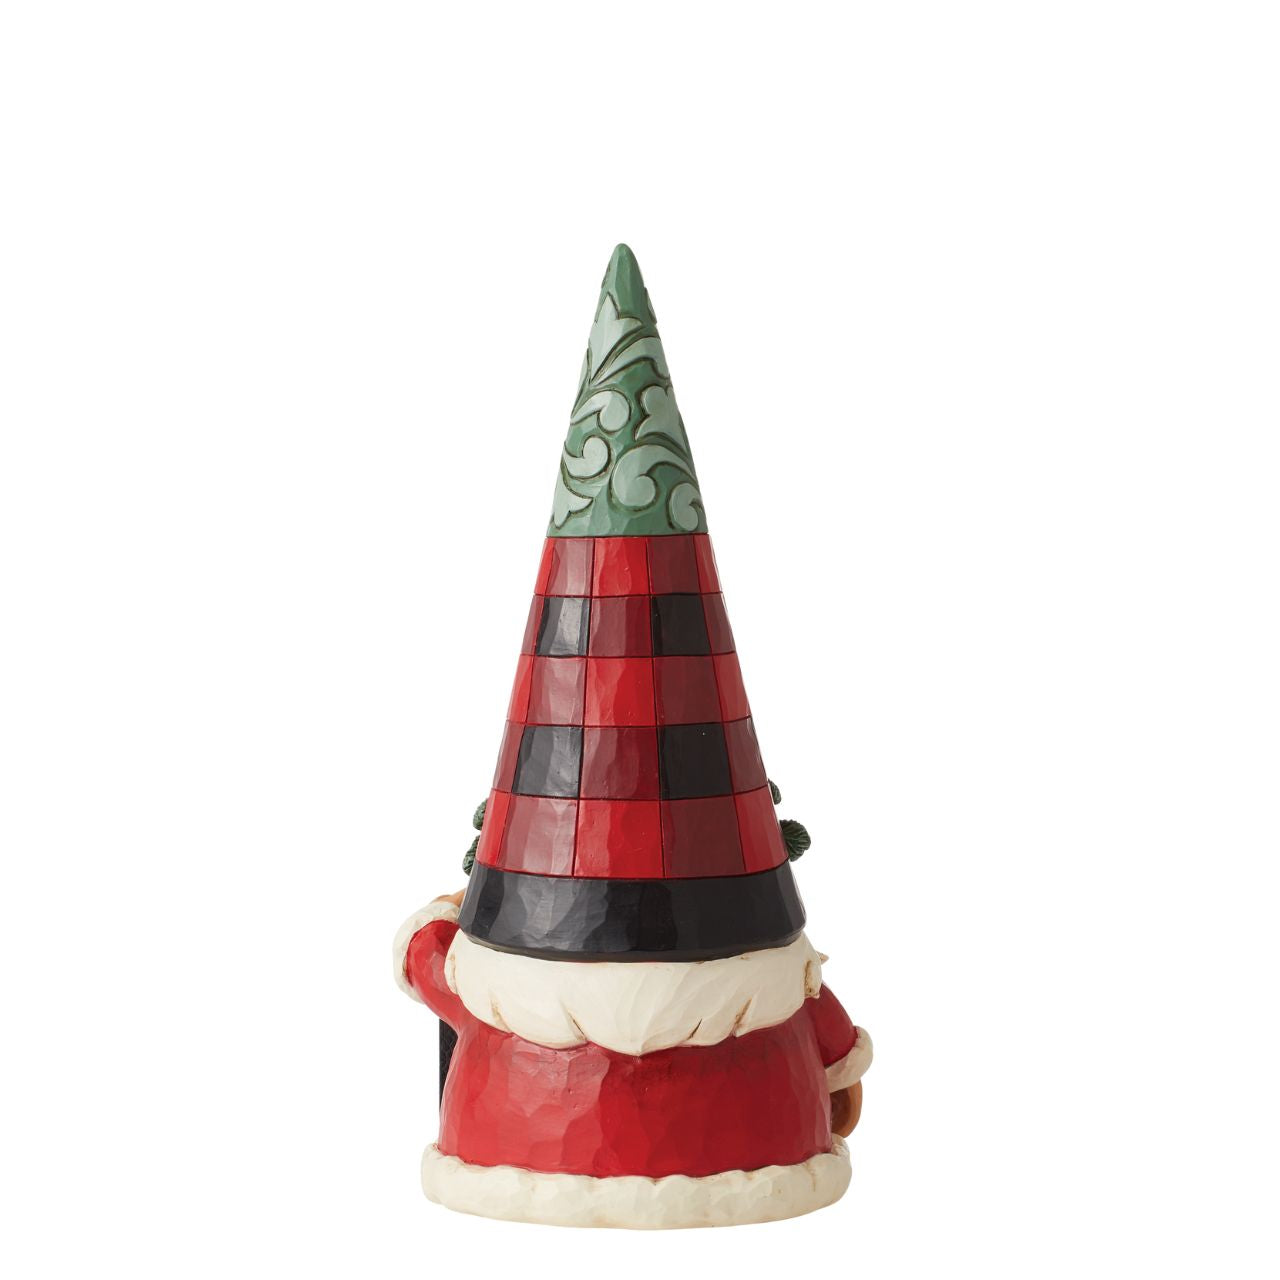 Highland Glen Gnome with Sleigh Bells Figurine  Designed by award winning artist Jim Shore as part of the Heartwood Creek Highland Glen Collection, hand crafted using high quality cast stone and hand painted, this festive Gnome is perfect for the Christmas season.